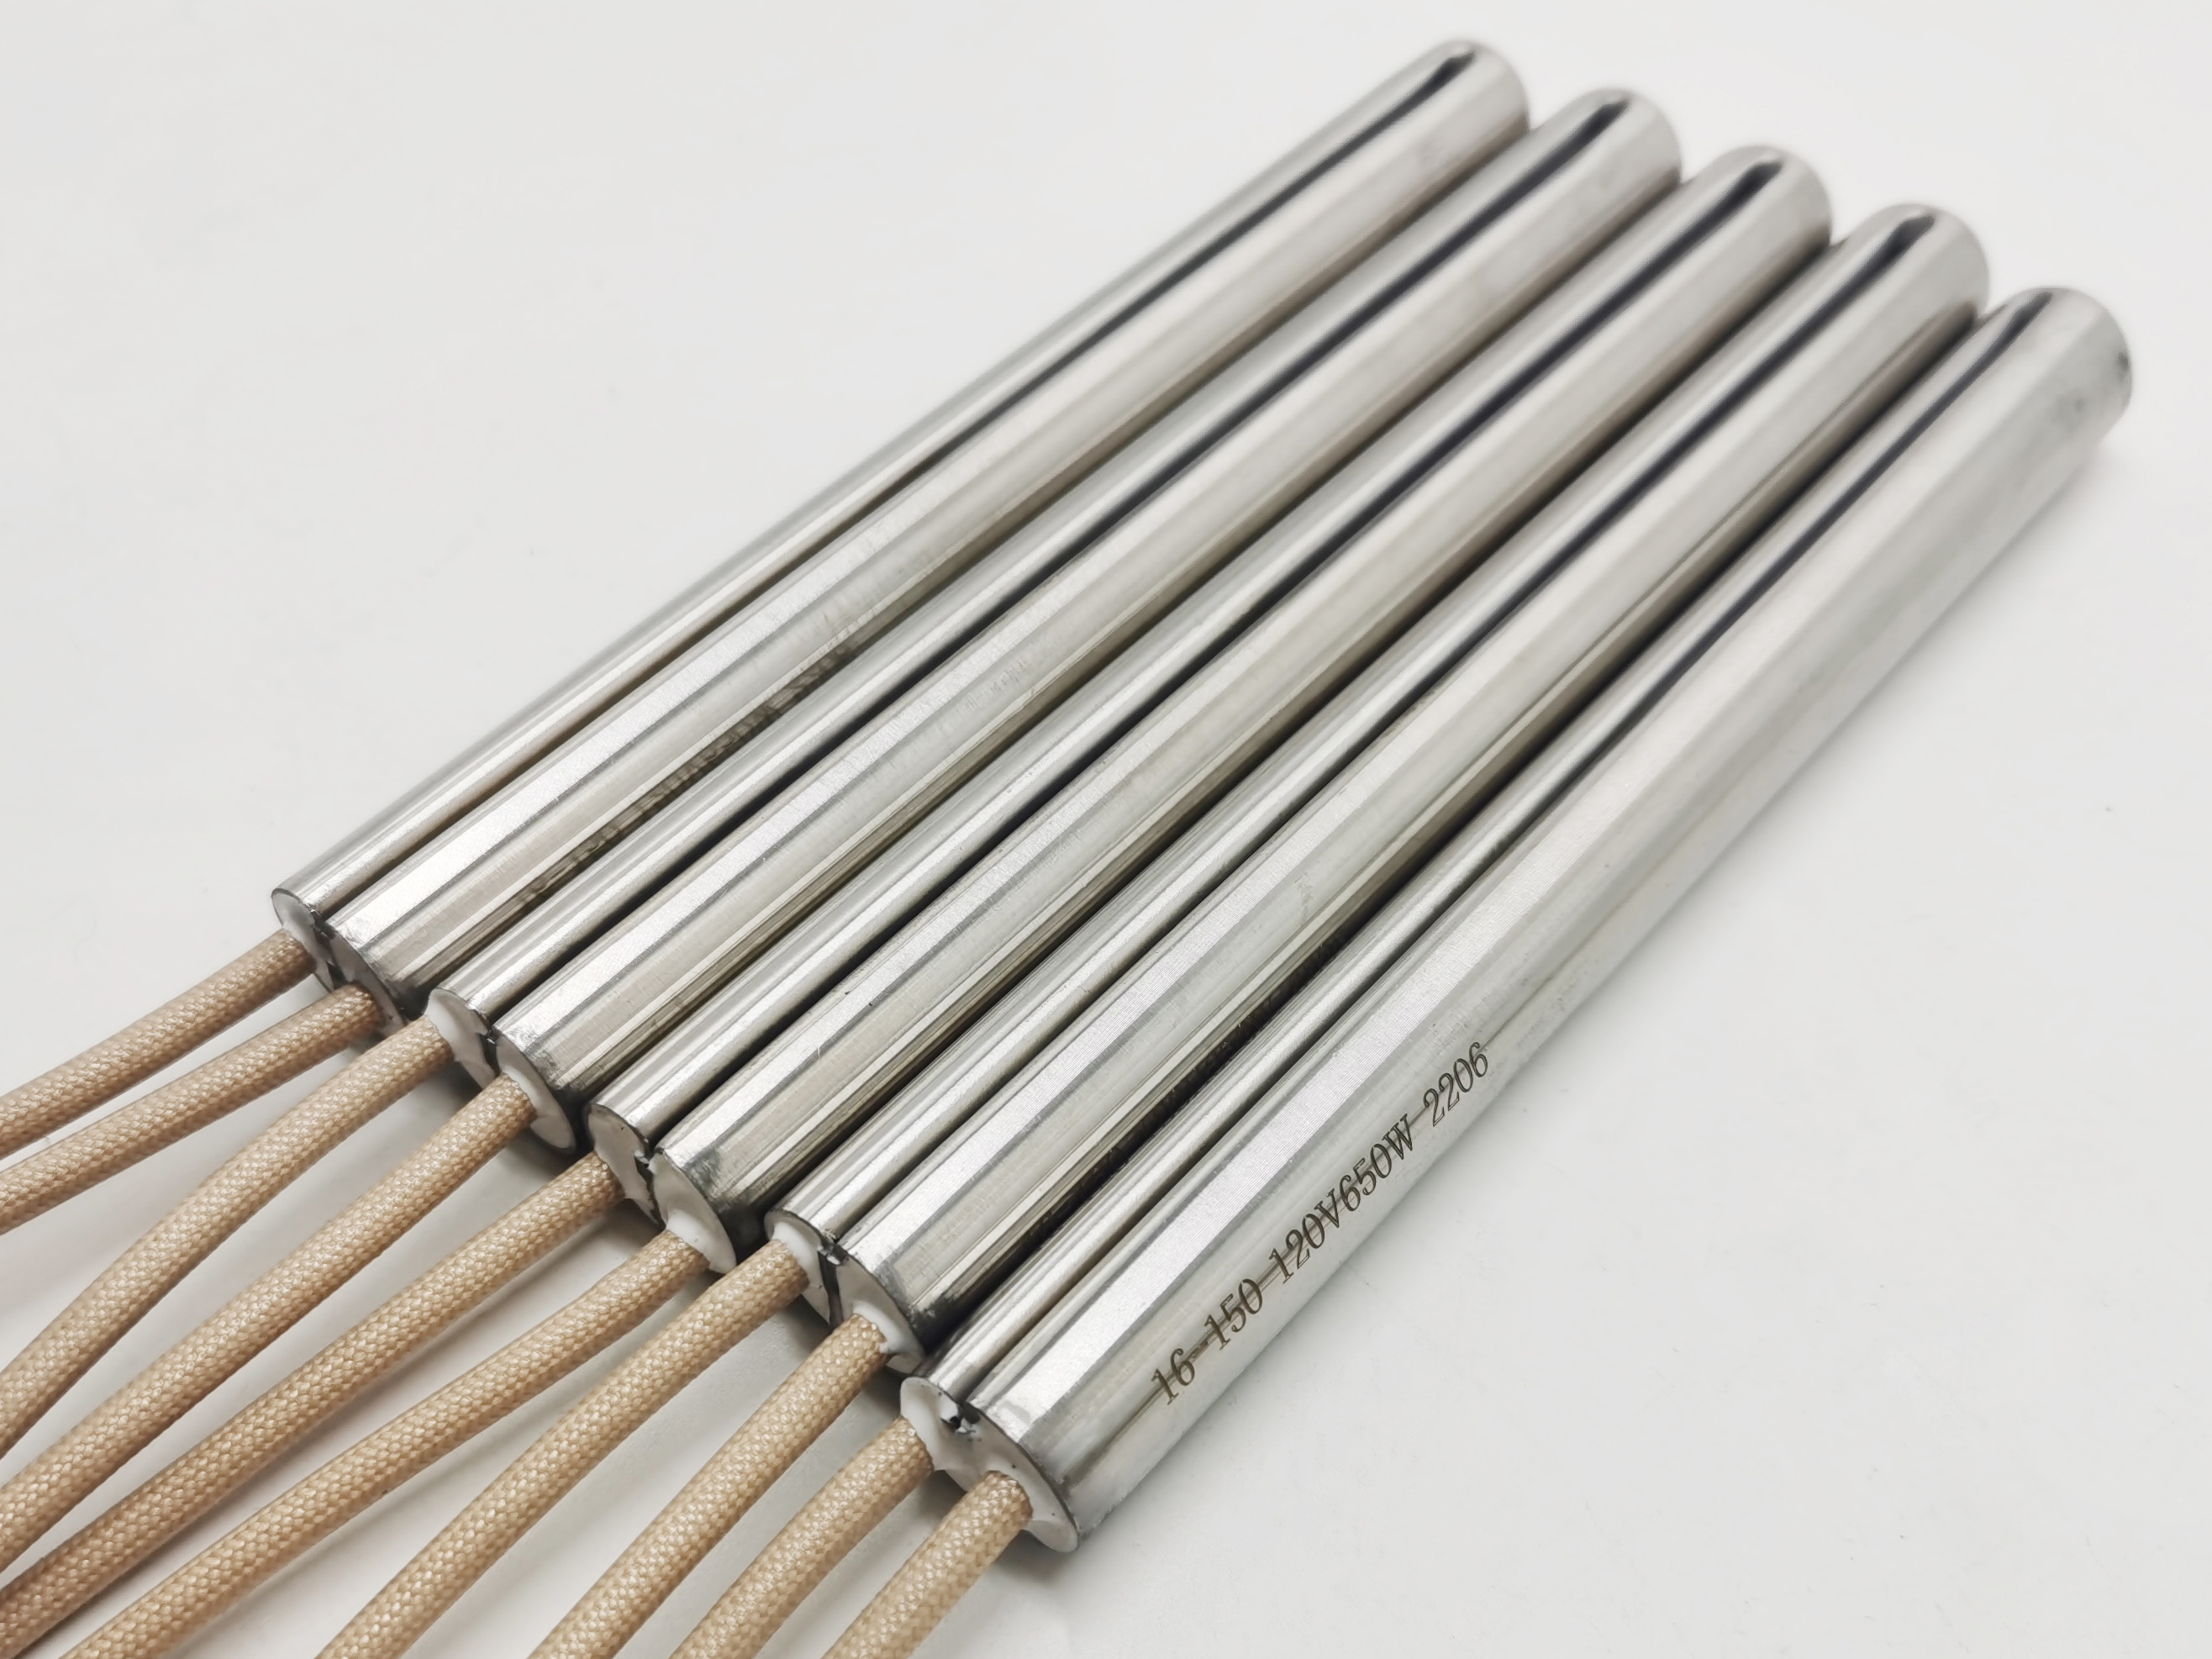 What are the functional characteristics of heating tubes?